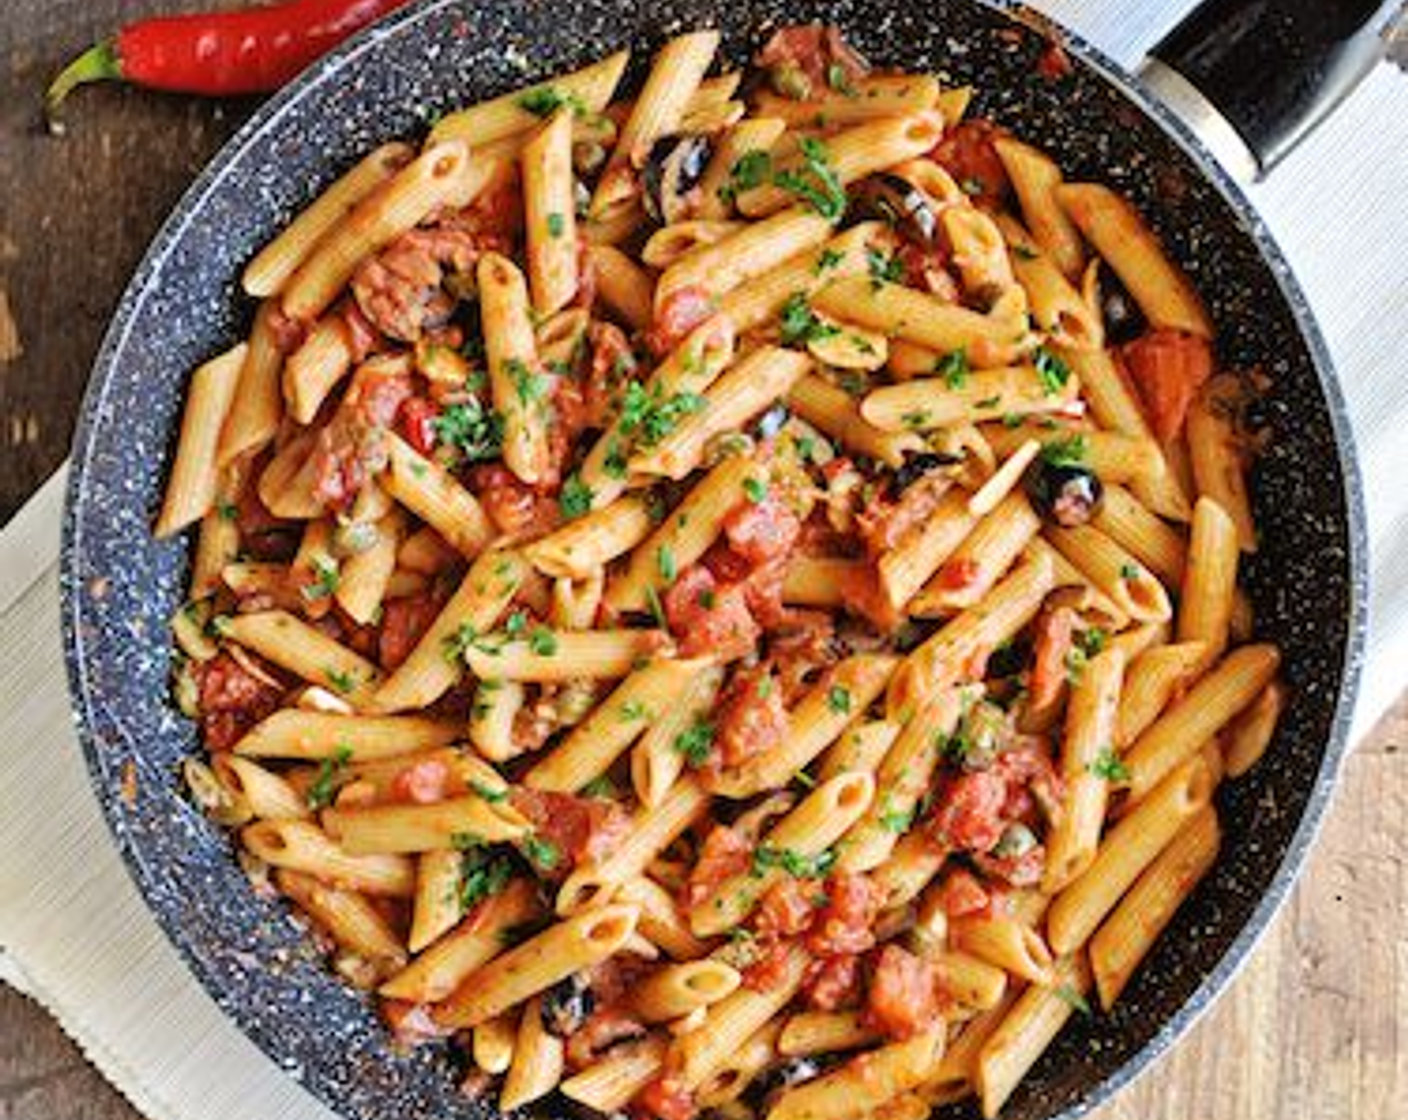 Spicy Penne Pasta with Anchovies, Capers & Black Olives